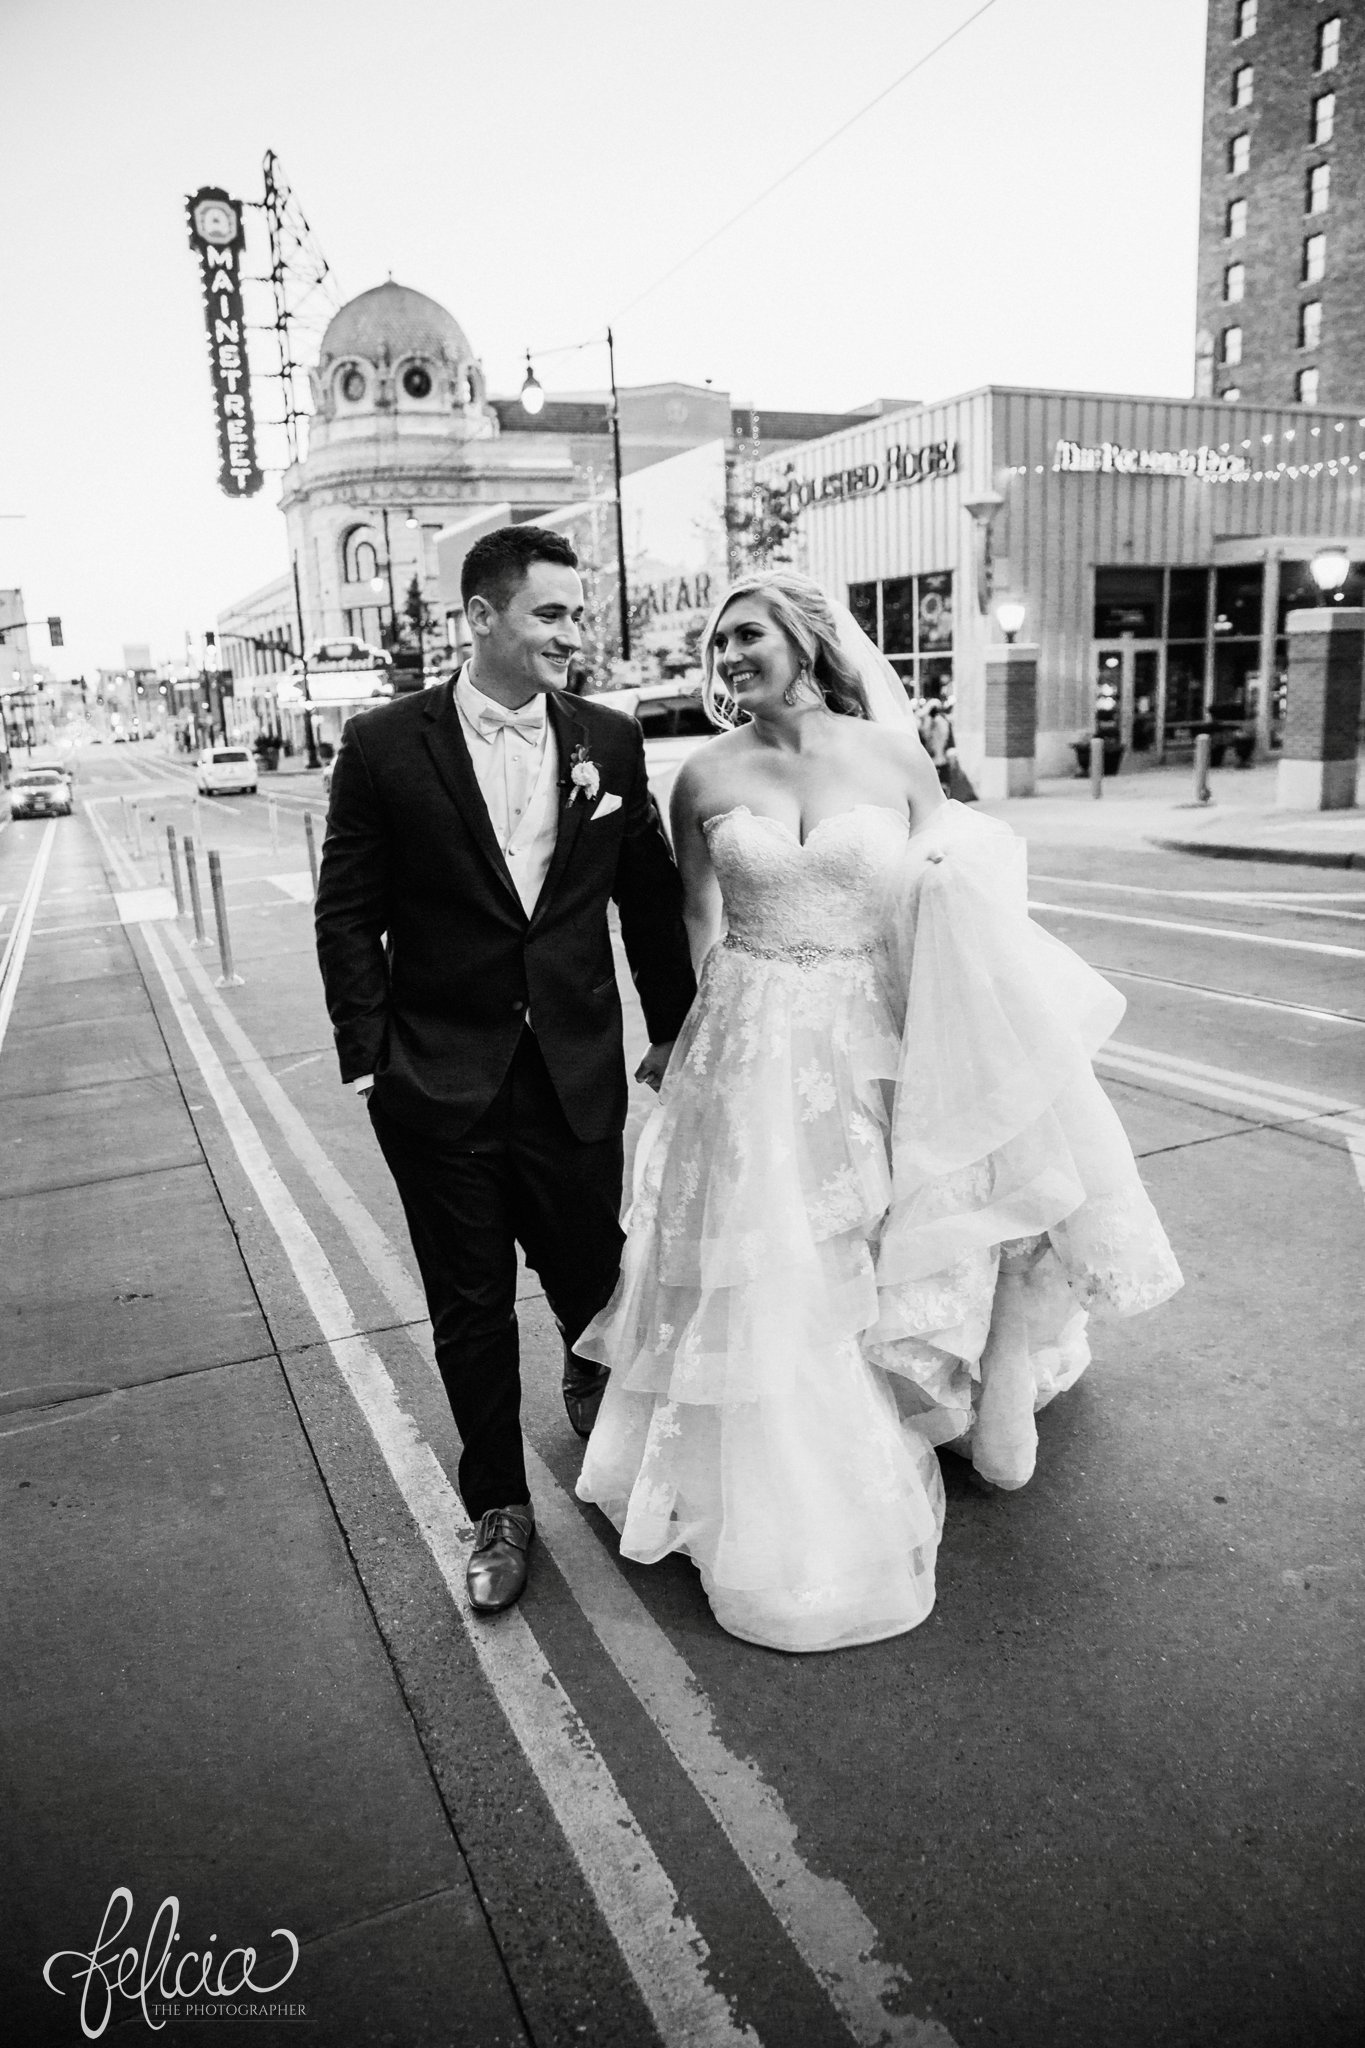 images by feliciathephotographer.com | wedding photographer | downtown kansas city | bride and groom candid | middle of the street | urban | black and white | power and light | romantic | holding hands | lace dress | belle vogue | black suit | men's warehouse | 